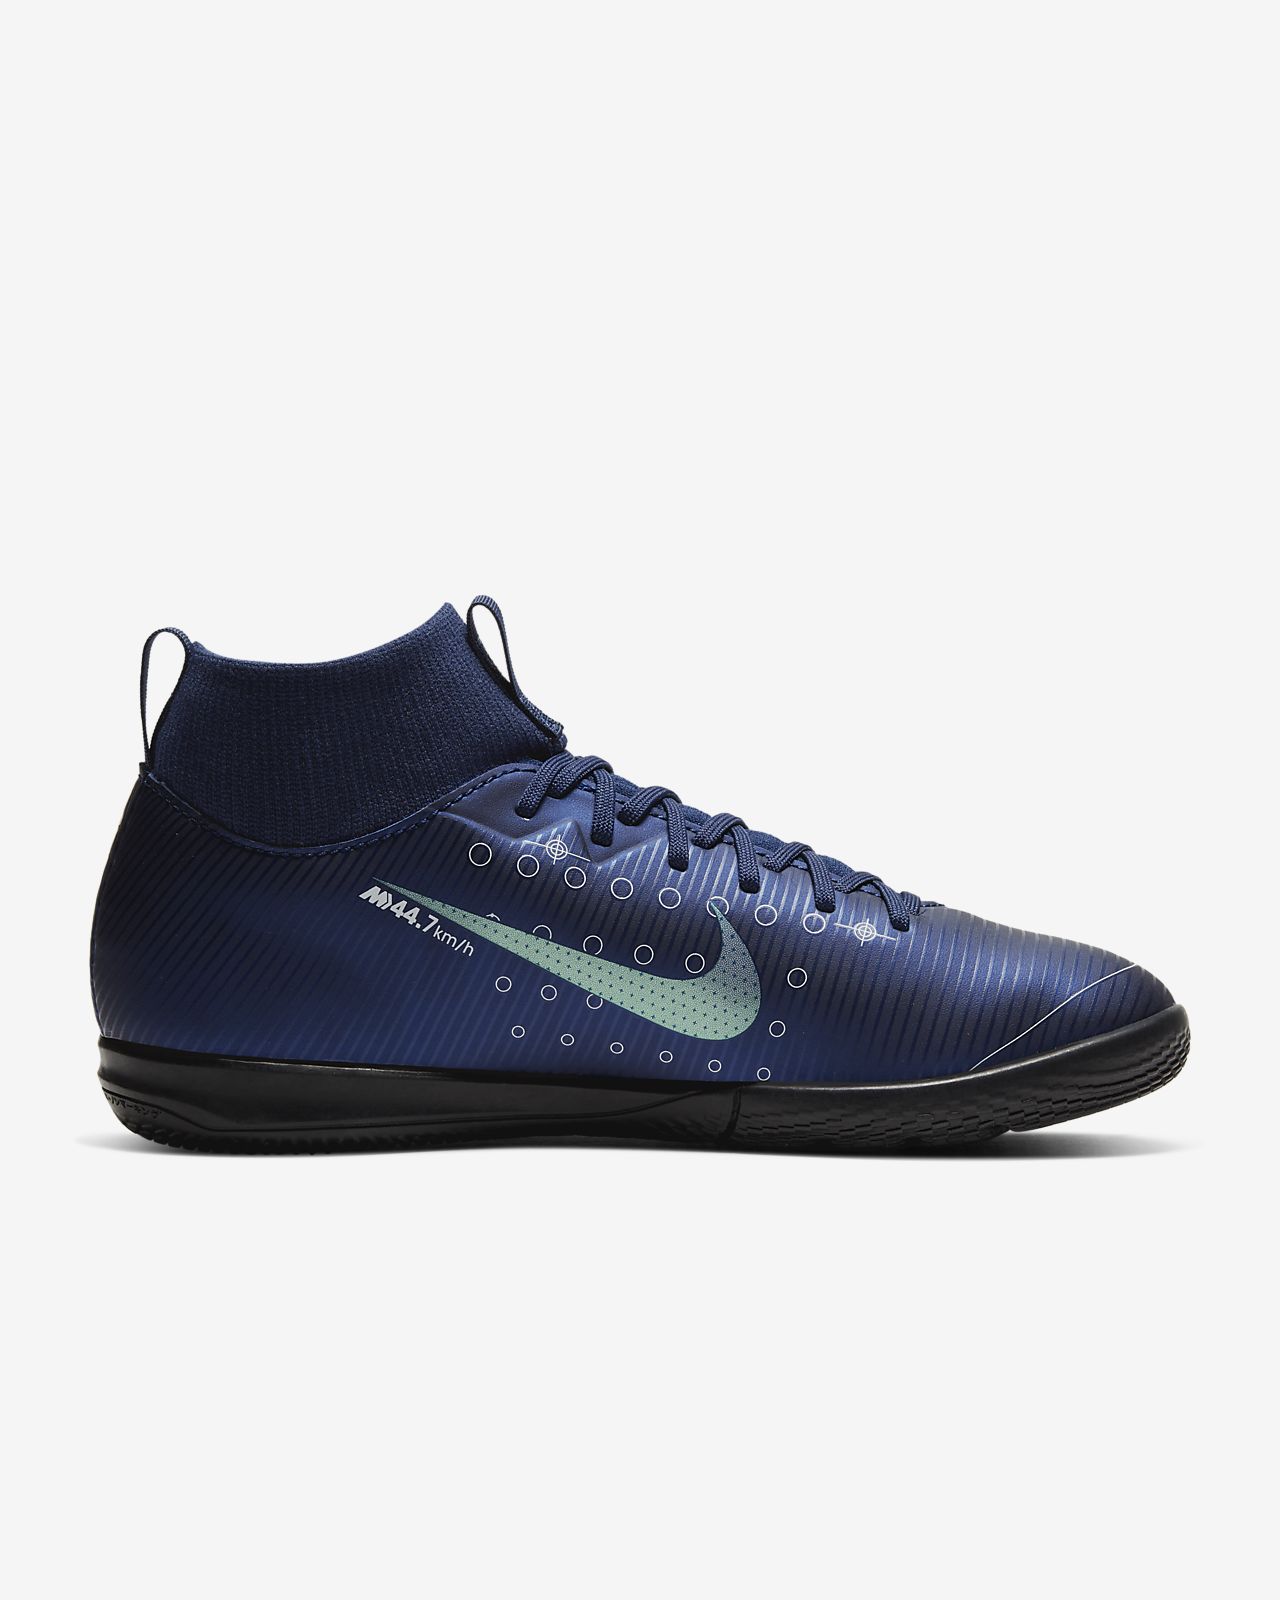 Nike Mercurial Superfly 7 Academy Mds Sg Pro Anti Clog.